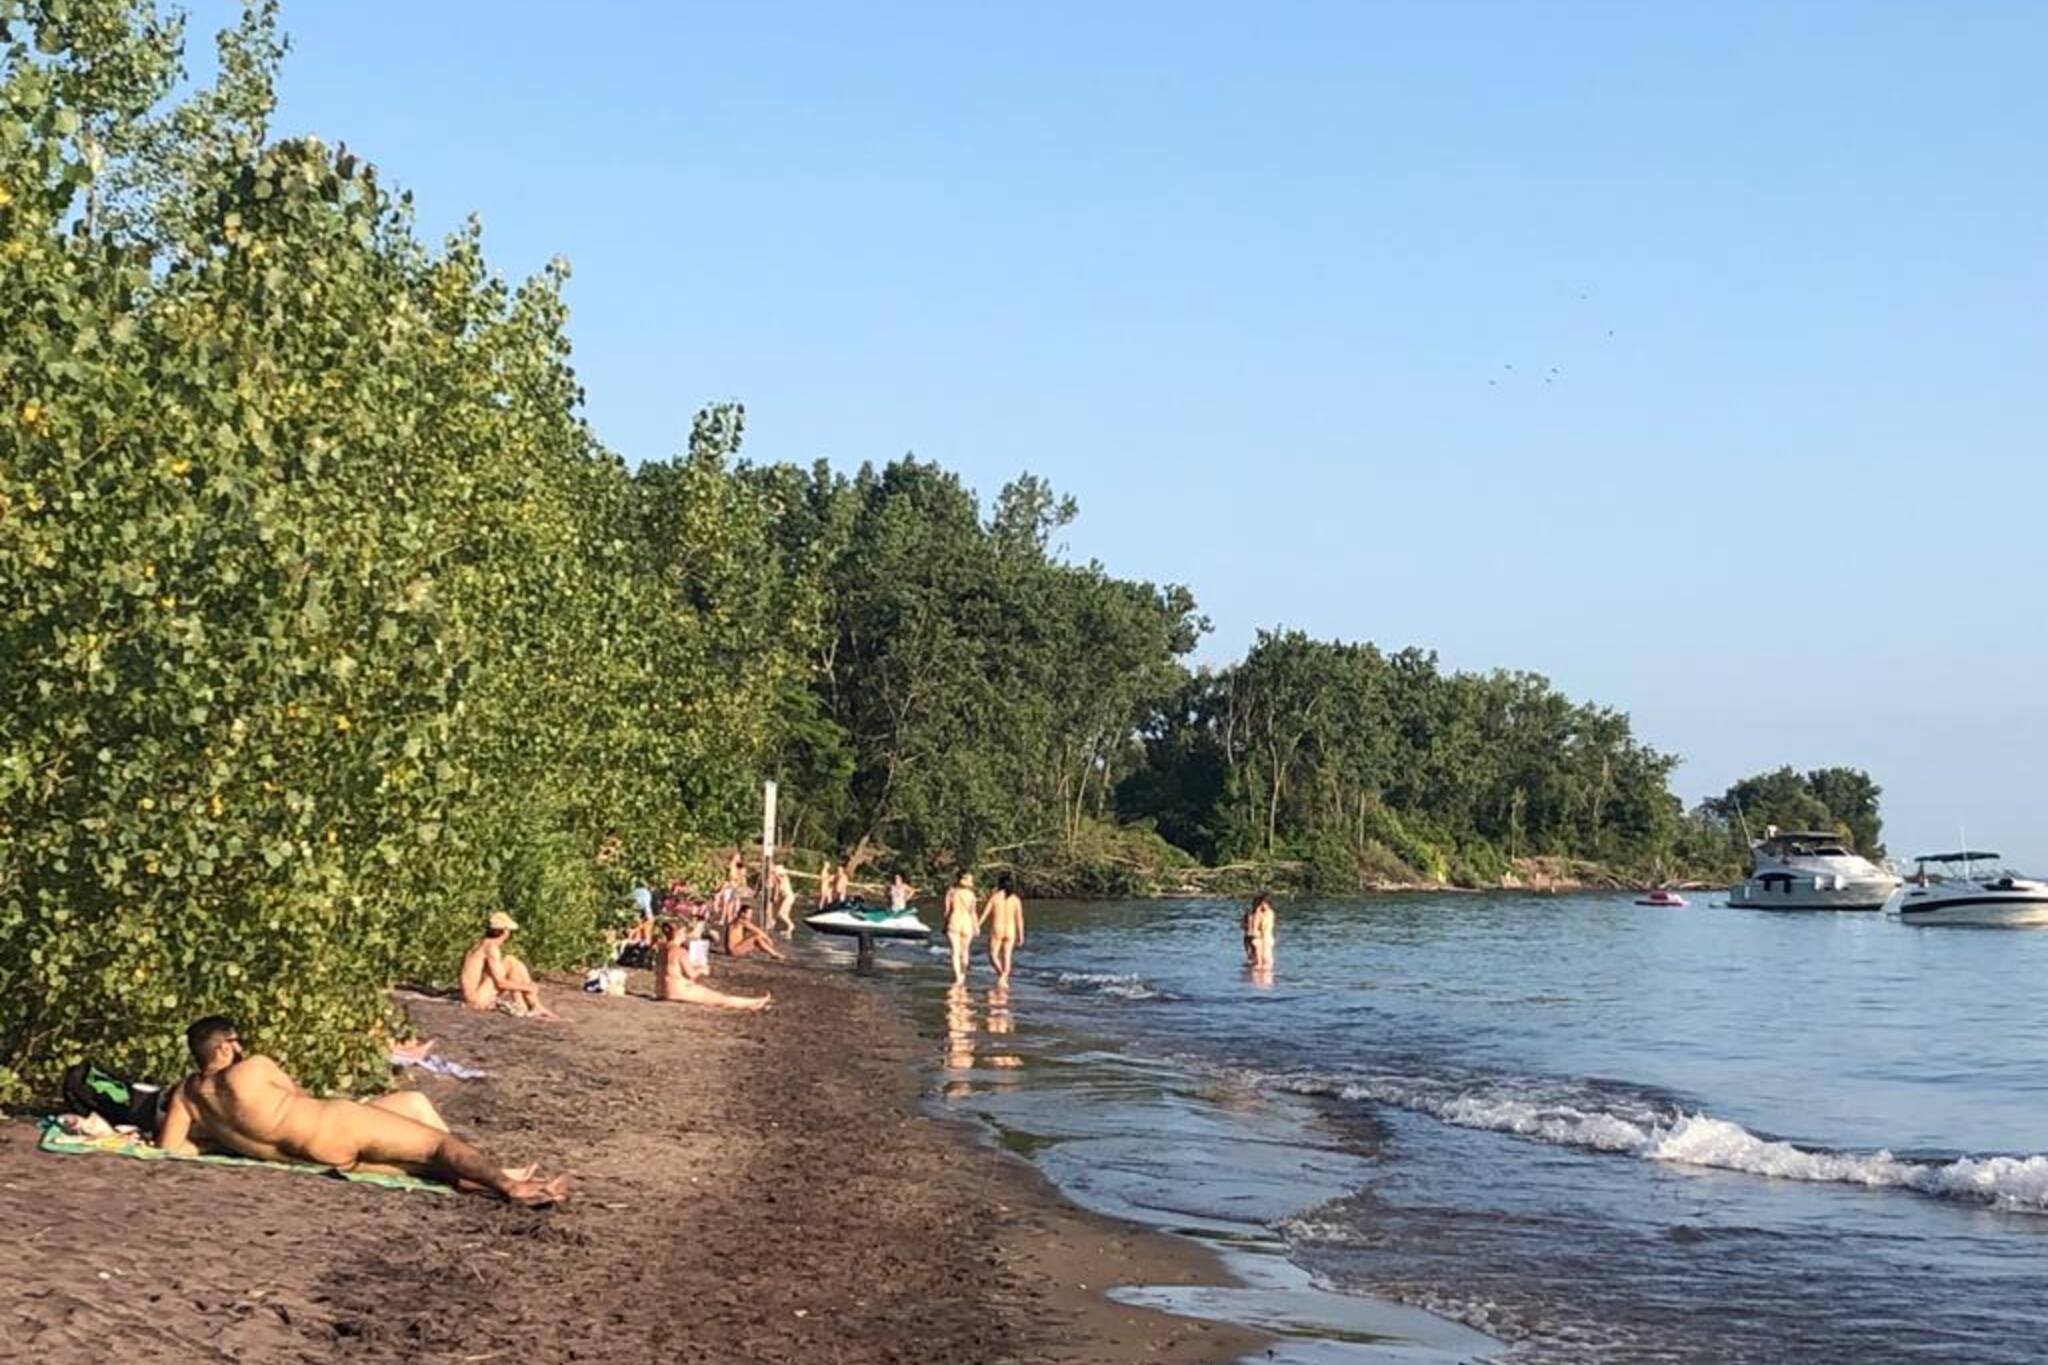 Hanlans Point is the Toronto Islands famous nude beach